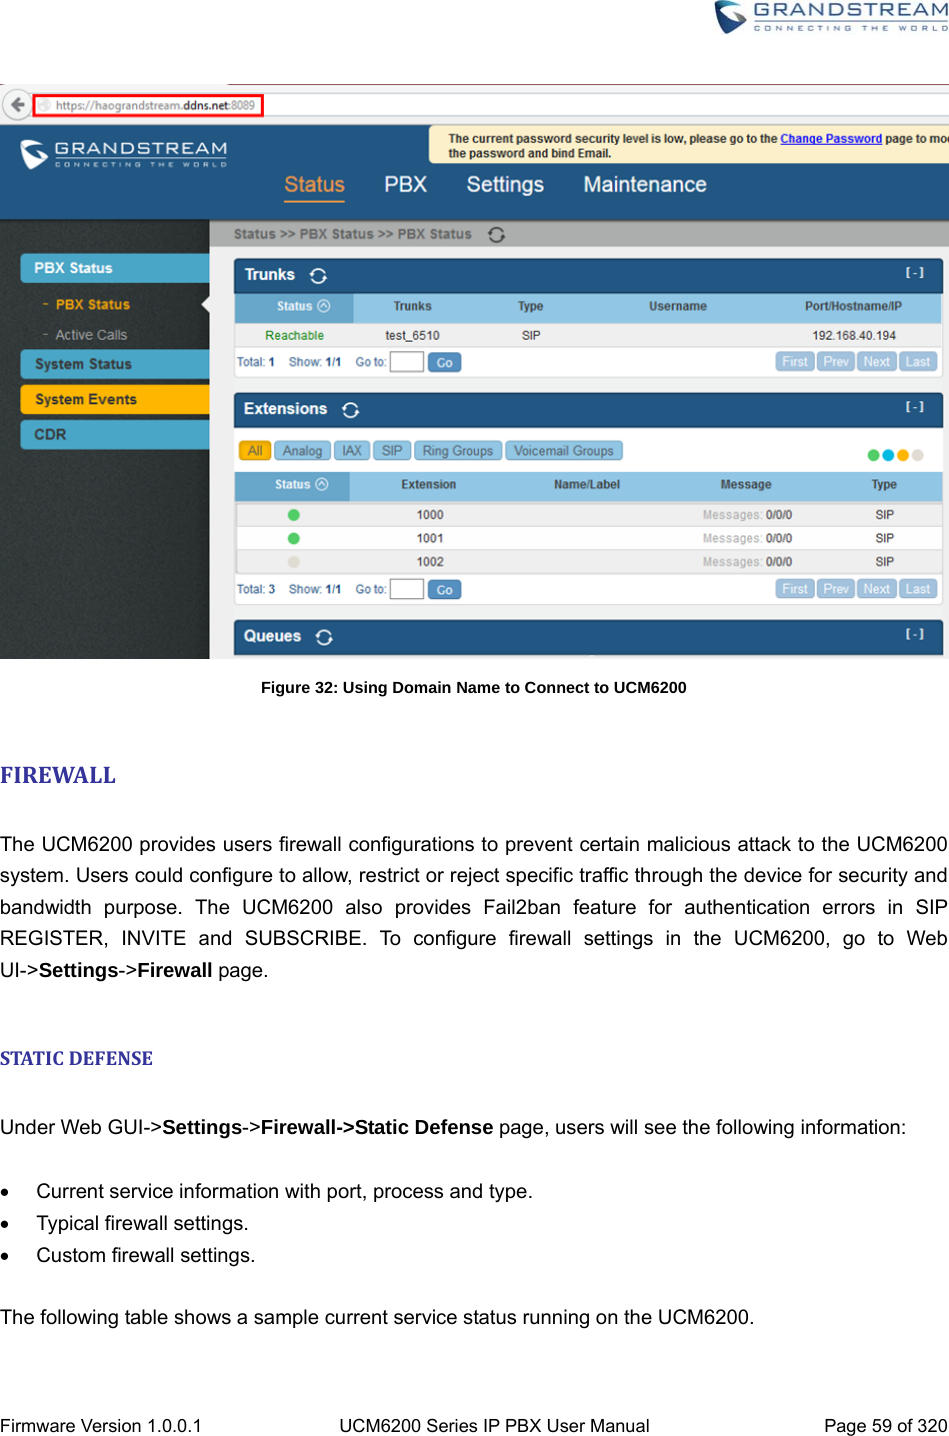  Firmware Version 1.0.0.1  UCM6200 Series IP PBX User Manual  Page 59 of 320  Figure 32: Using Domain Name to Connect to UCM6200  FIREWALL The UCM6200 provides users firewall configurations to prevent certain malicious attack to the UCM6200 system. Users could configure to allow, restrict or reject specific traffic through the device for security and bandwidth purpose. The UCM6200 also provides Fail2ban feature for authentication errors in SIP REGISTER, INVITE and SUBSCRIBE. To configure firewall settings in the UCM6200, go to Web UI-&gt;Settings-&gt;Firewall page.  STATICDEFENSE Under Web GUI-&gt;Settings-&gt;Firewall-&gt;Static Defense page, users will see the following information:    Current service information with port, process and type.  Typical firewall settings.   Custom firewall settings.  The following table shows a sample current service status running on the UCM6200.  